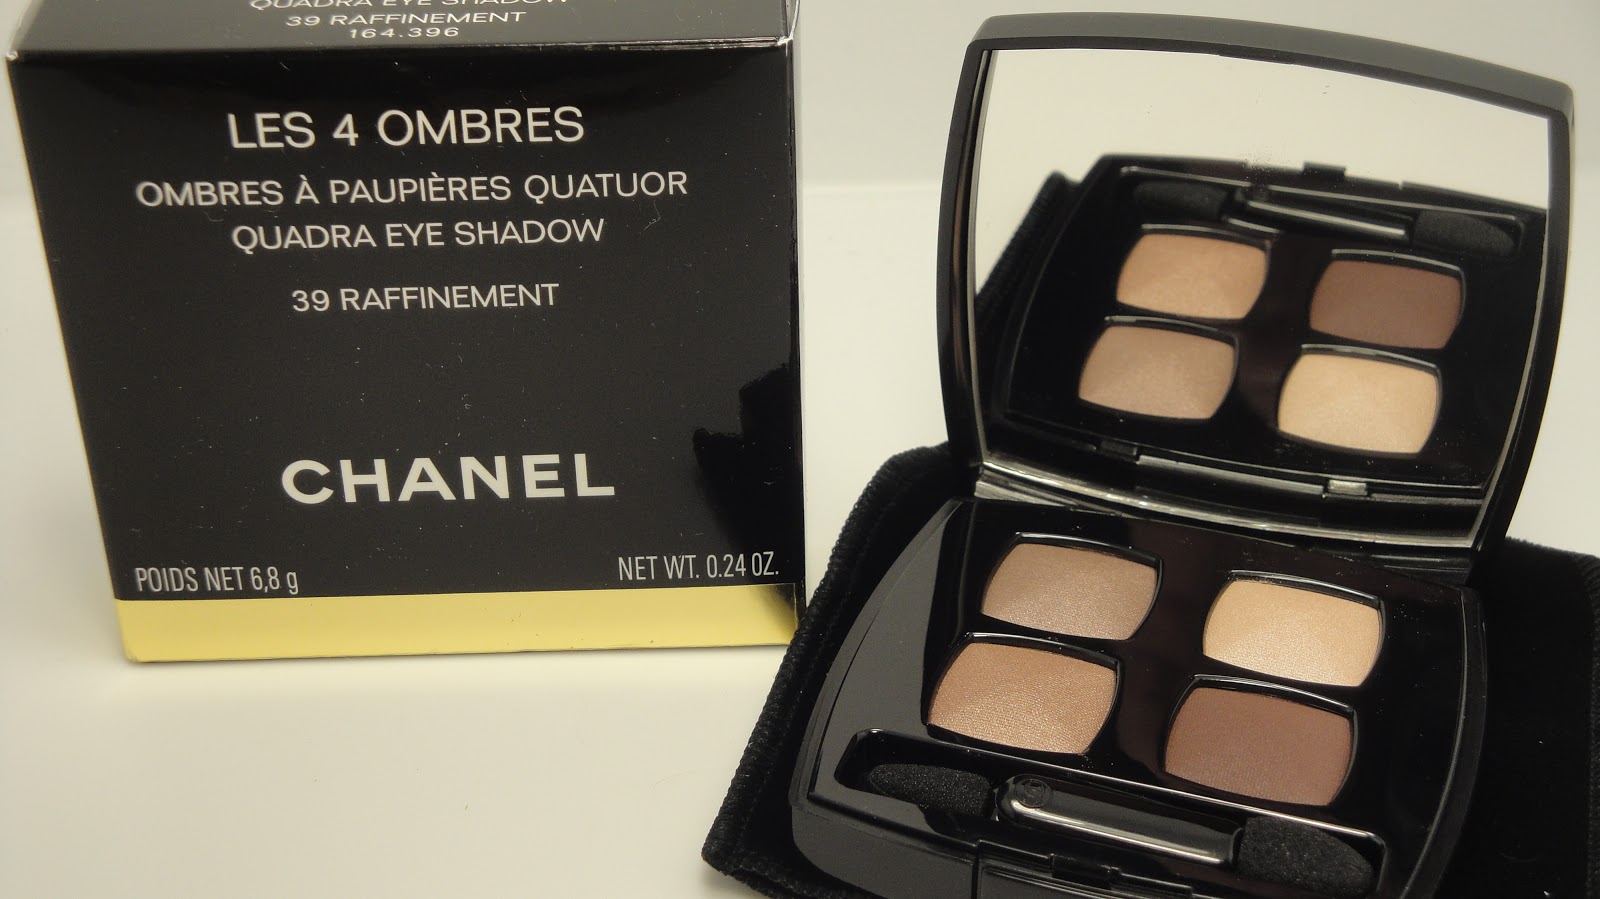 Jayded Dreaming Beauty Blog : 39 RAFFINEMENT CHANEL LES 4 OMBRES QUADRA EYE  SHADOW - SWATCHES AND REVIEW